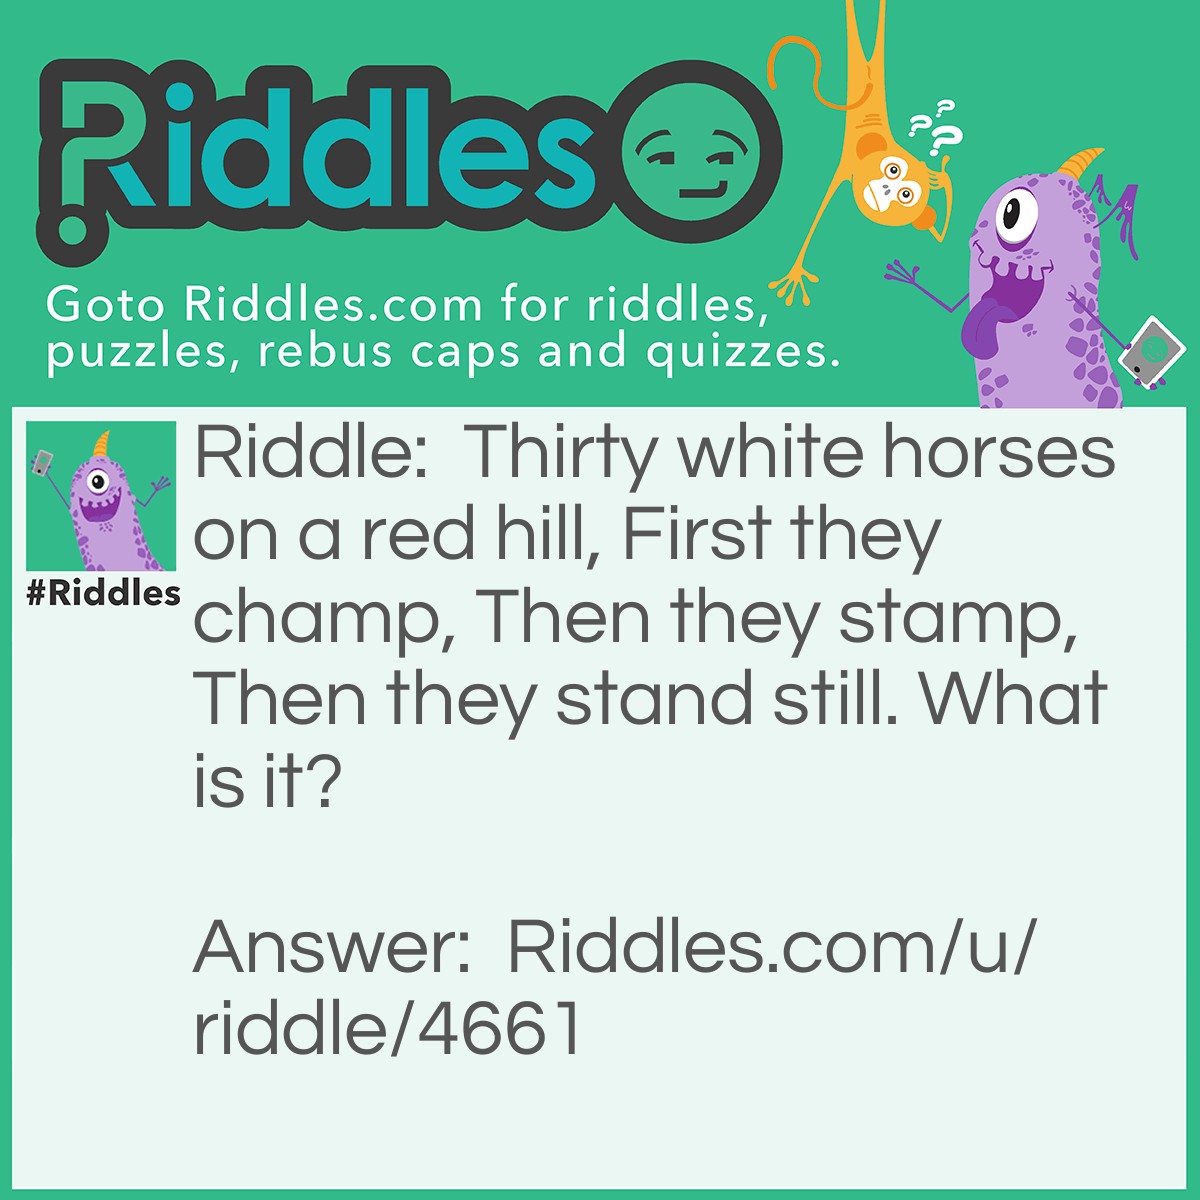 Riddle: Thirty white horses on a red hill, First they champ, Then they stamp, Then they stand still. What is it? Answer: Teeth.